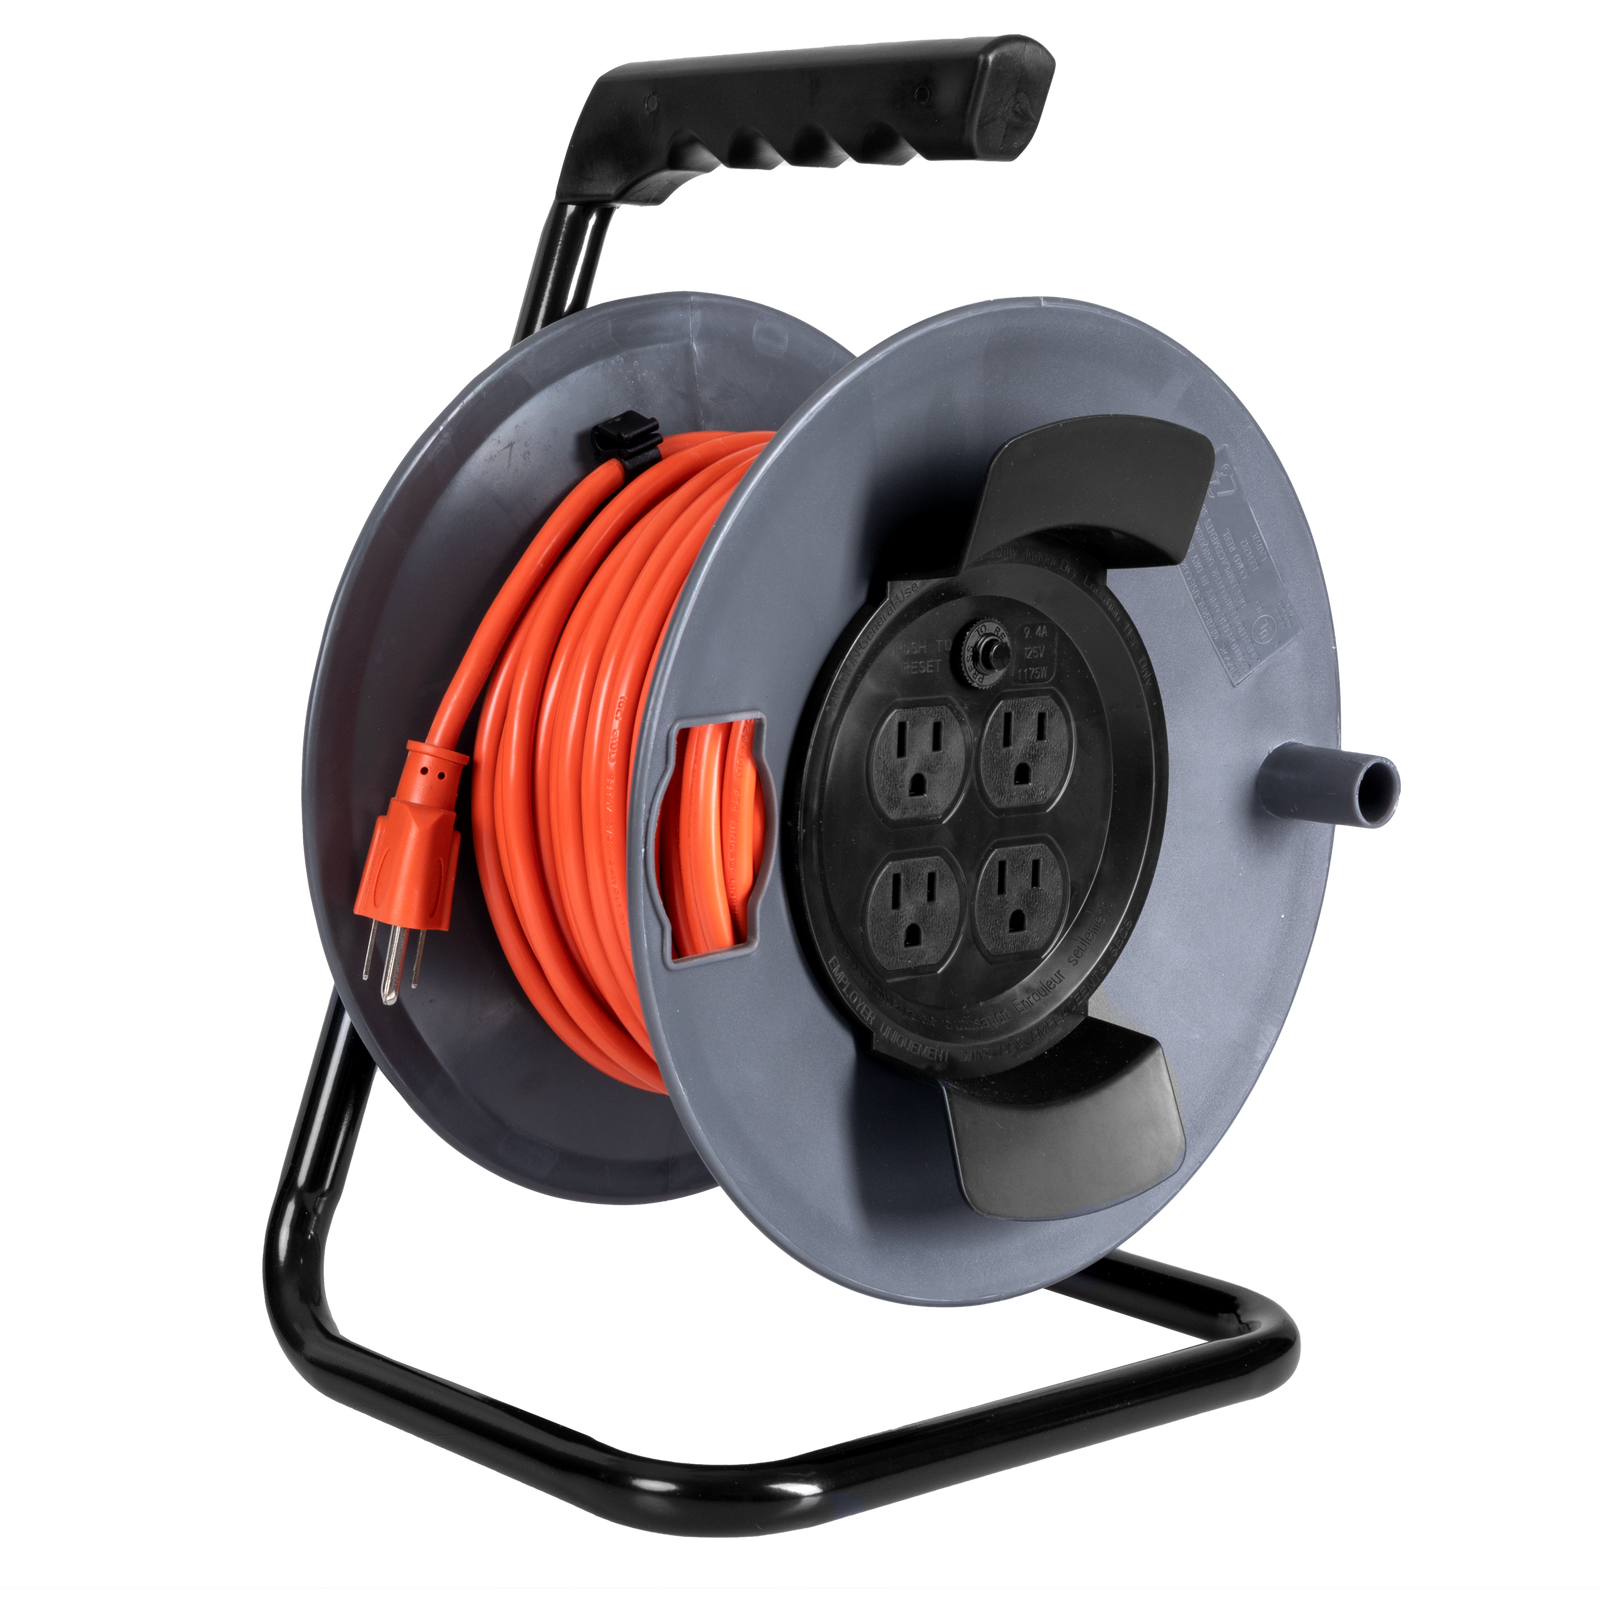 15 amp cord reel in RV Extension Cord Online Shopping